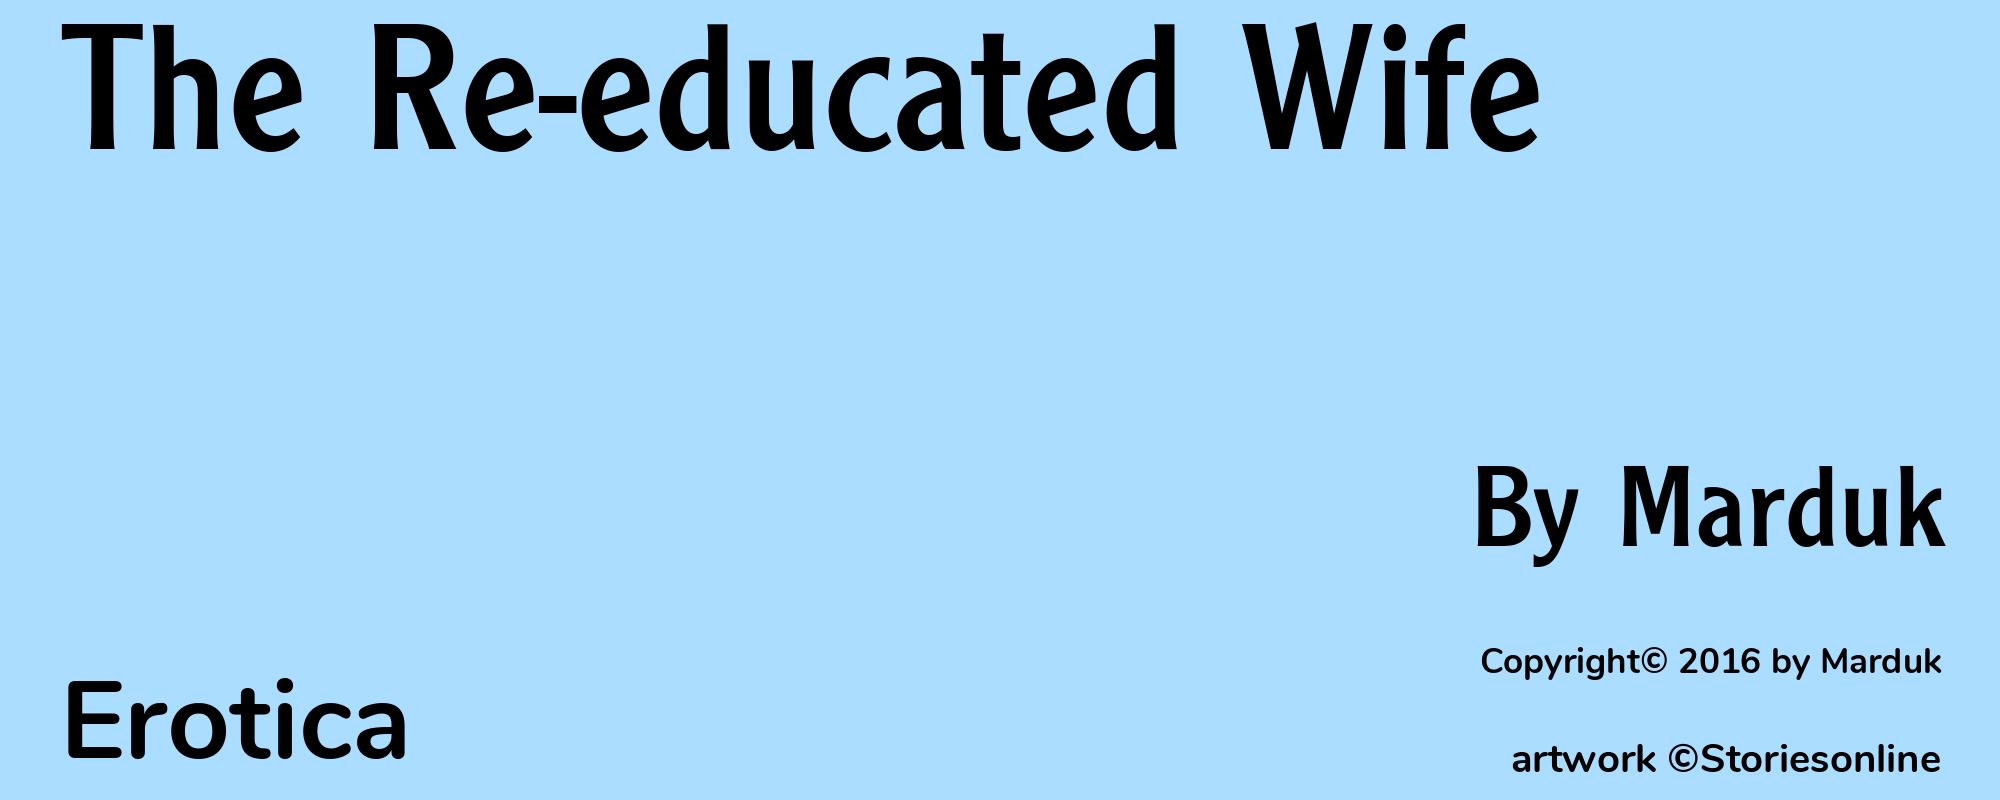 The Re-educated Wife - Cover